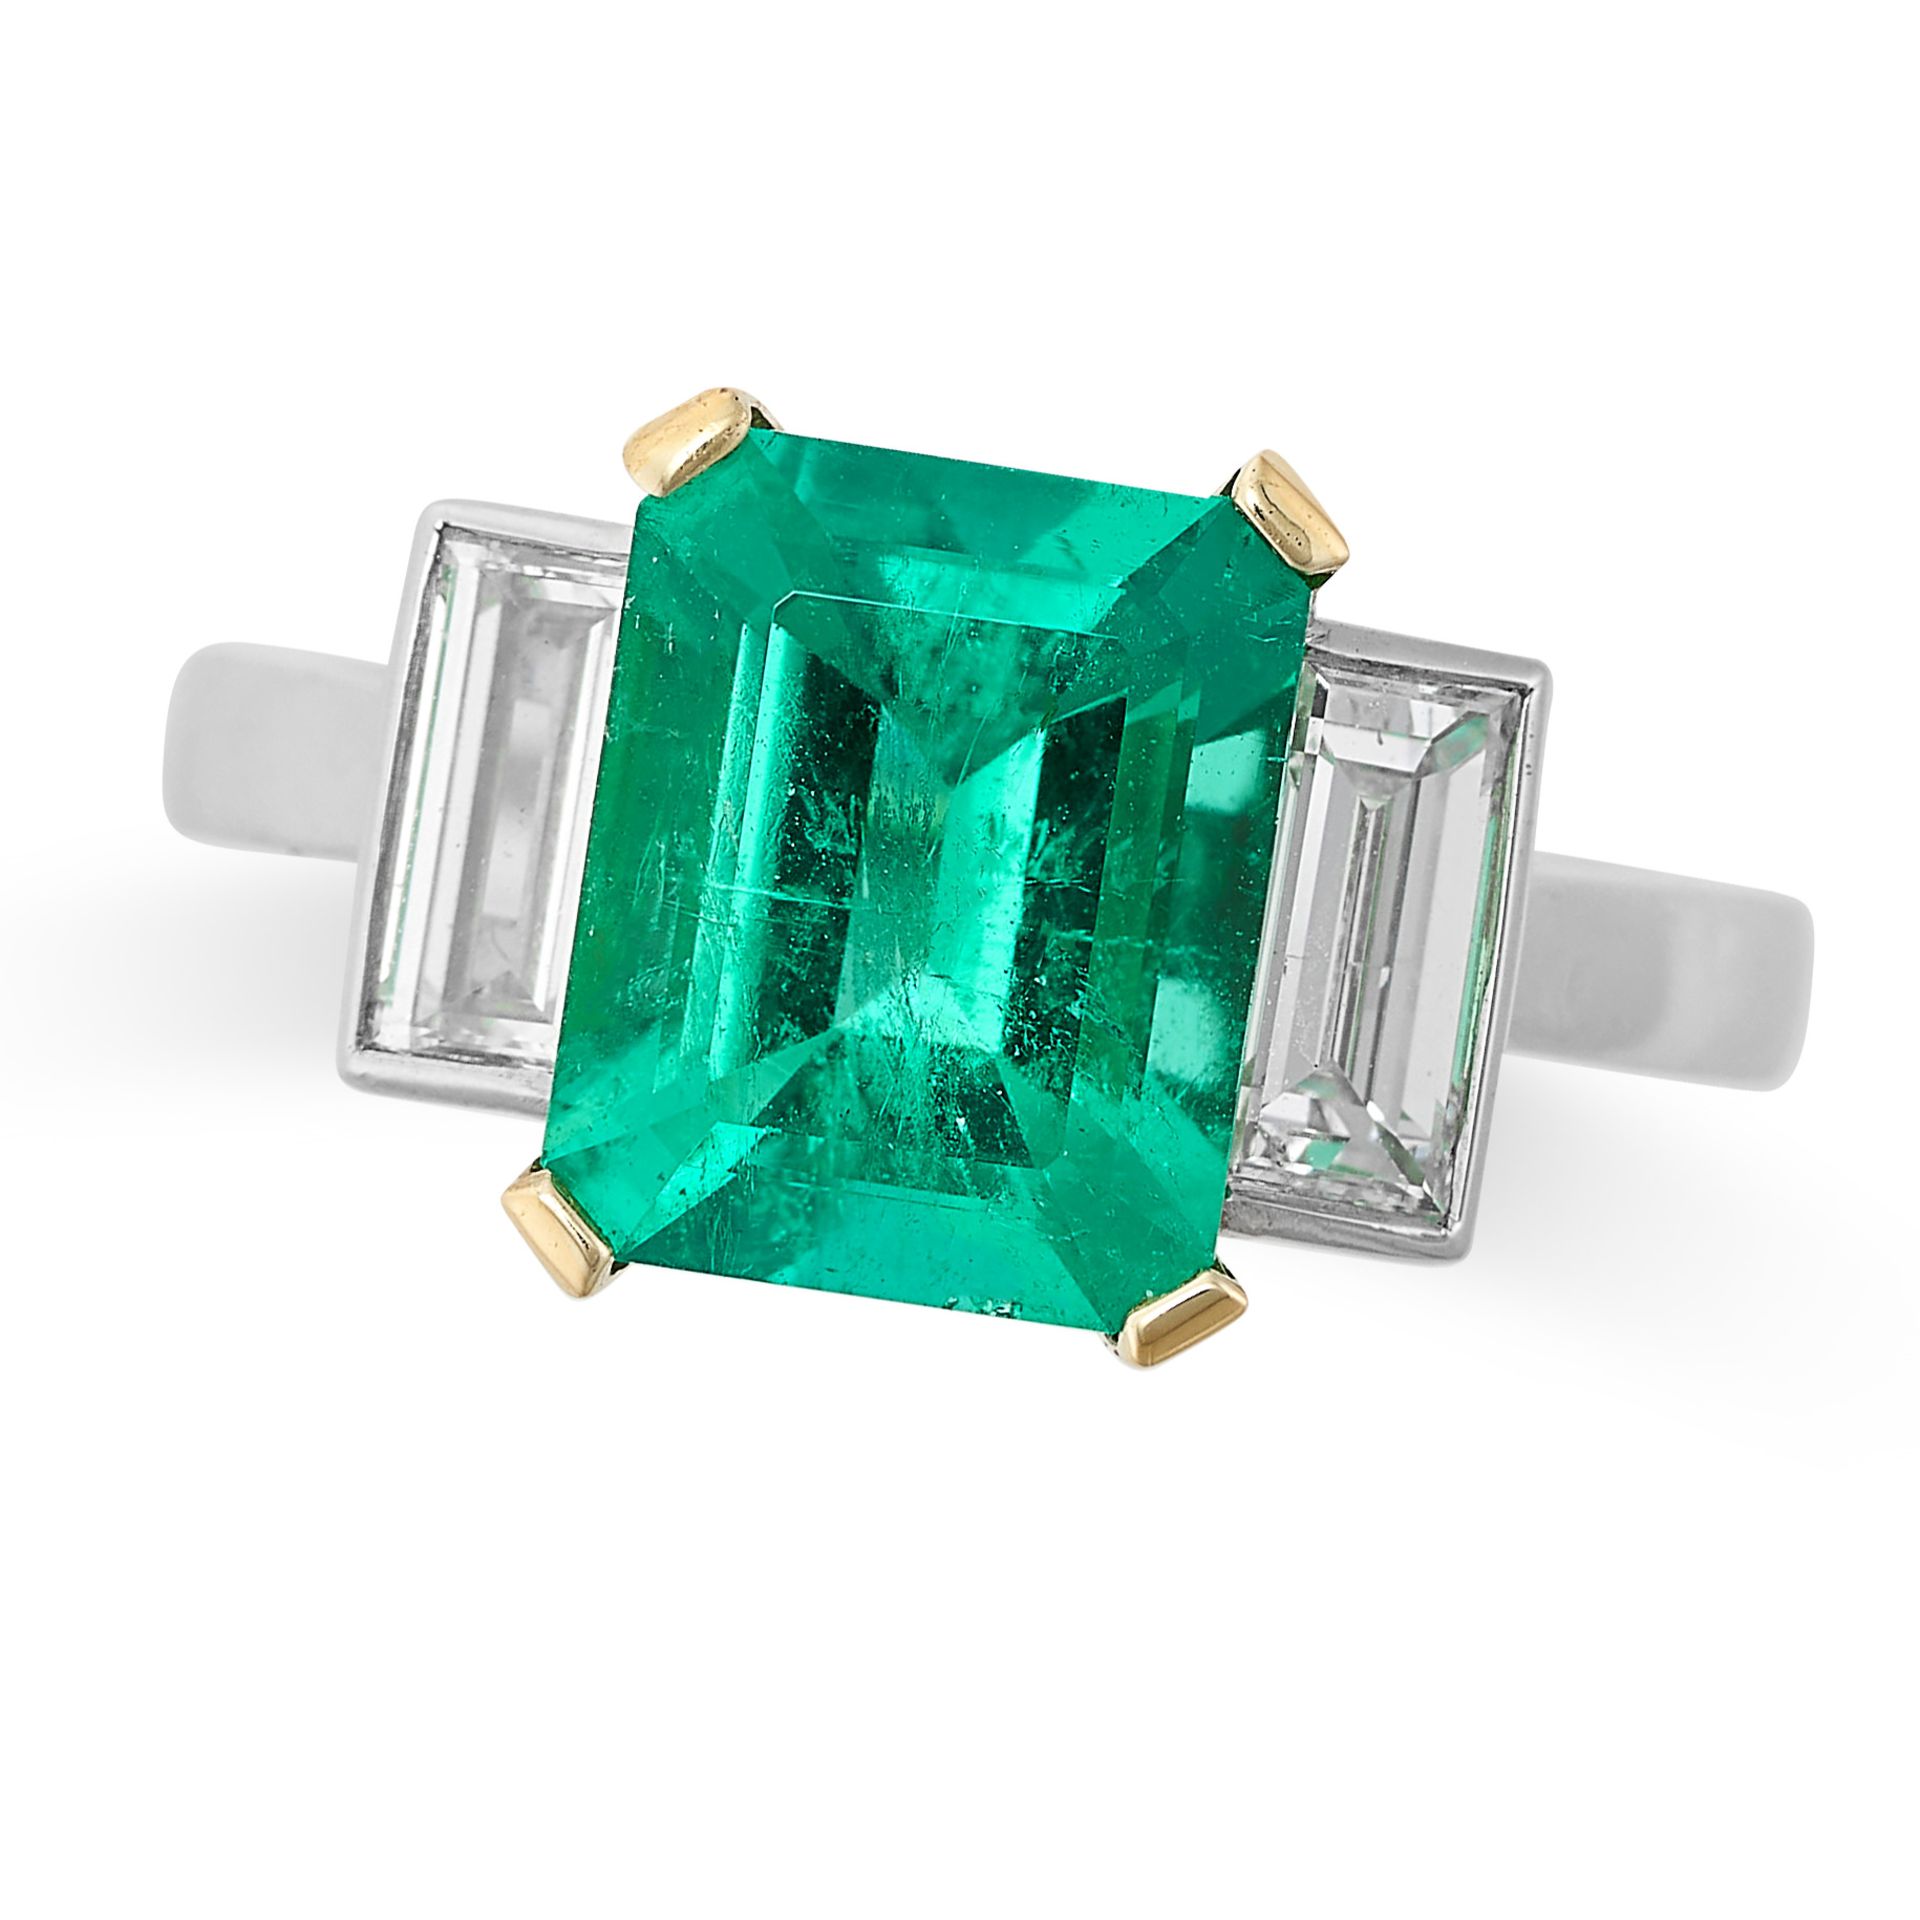 A COLOMBIAN EMERALD AND DIAMOND RING in 18ct yellow gold and platinum, set with an octagonal cut